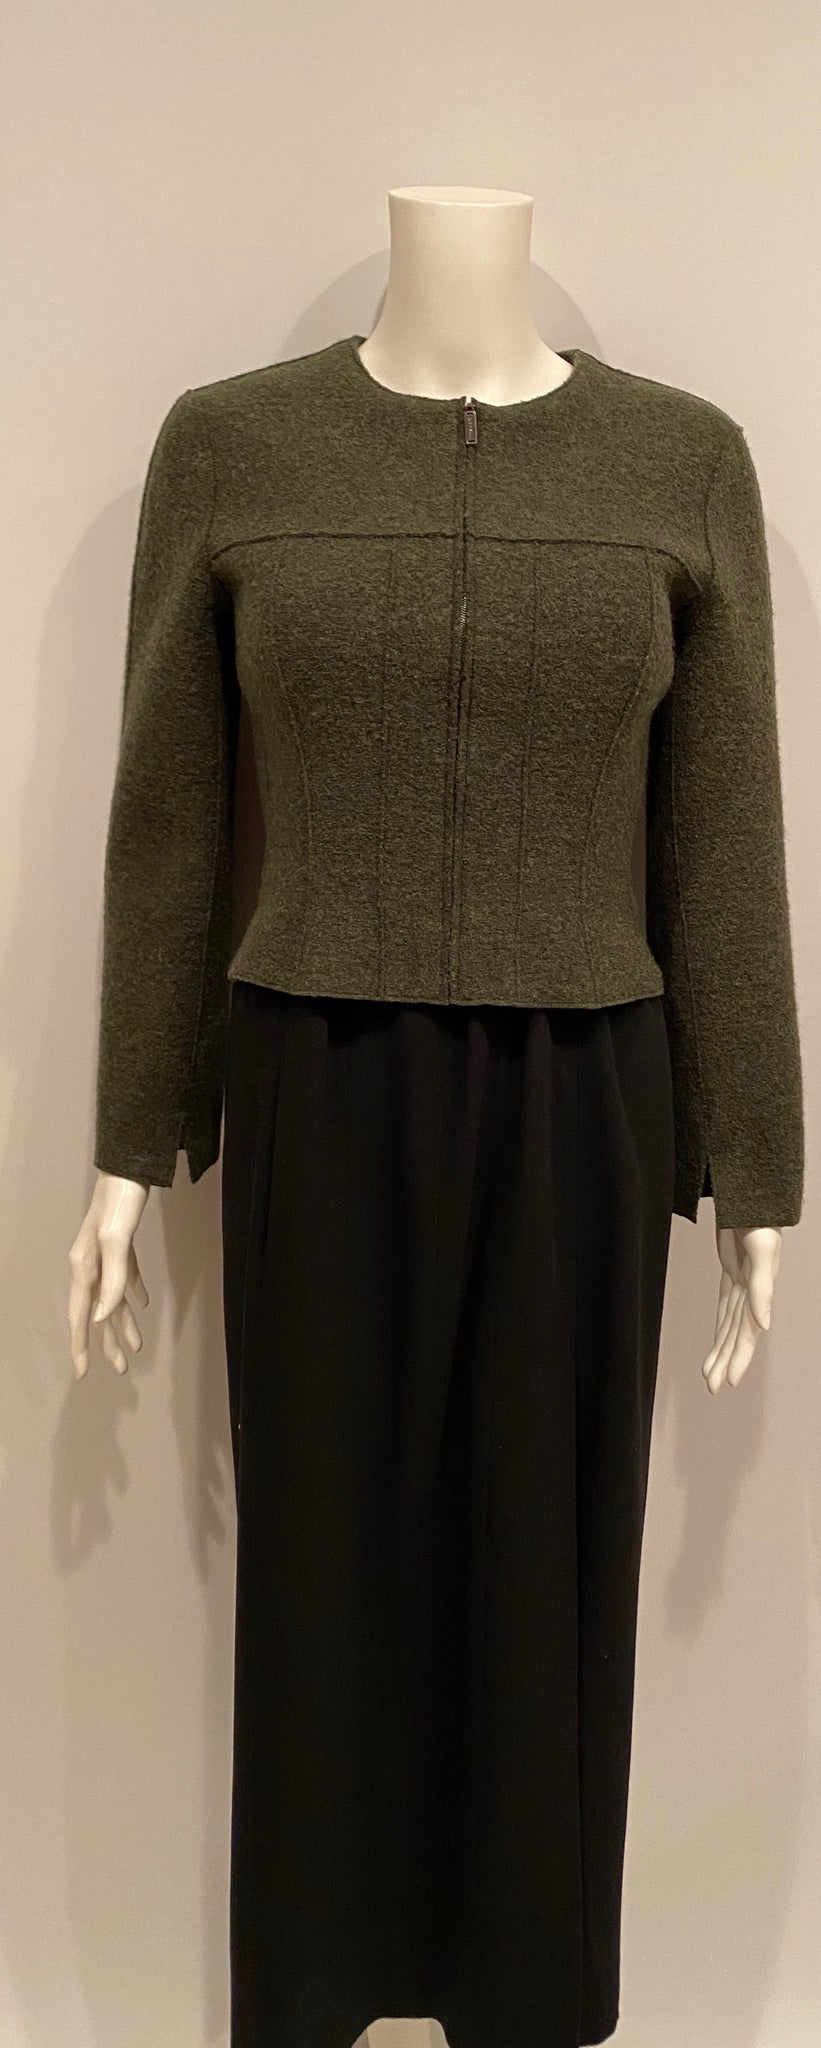 HelensChanel Nwt Vintage 99A, 1999 Fall Chanel Identification Olive Green Boiled Wool Short Jacket FR 36 US 4